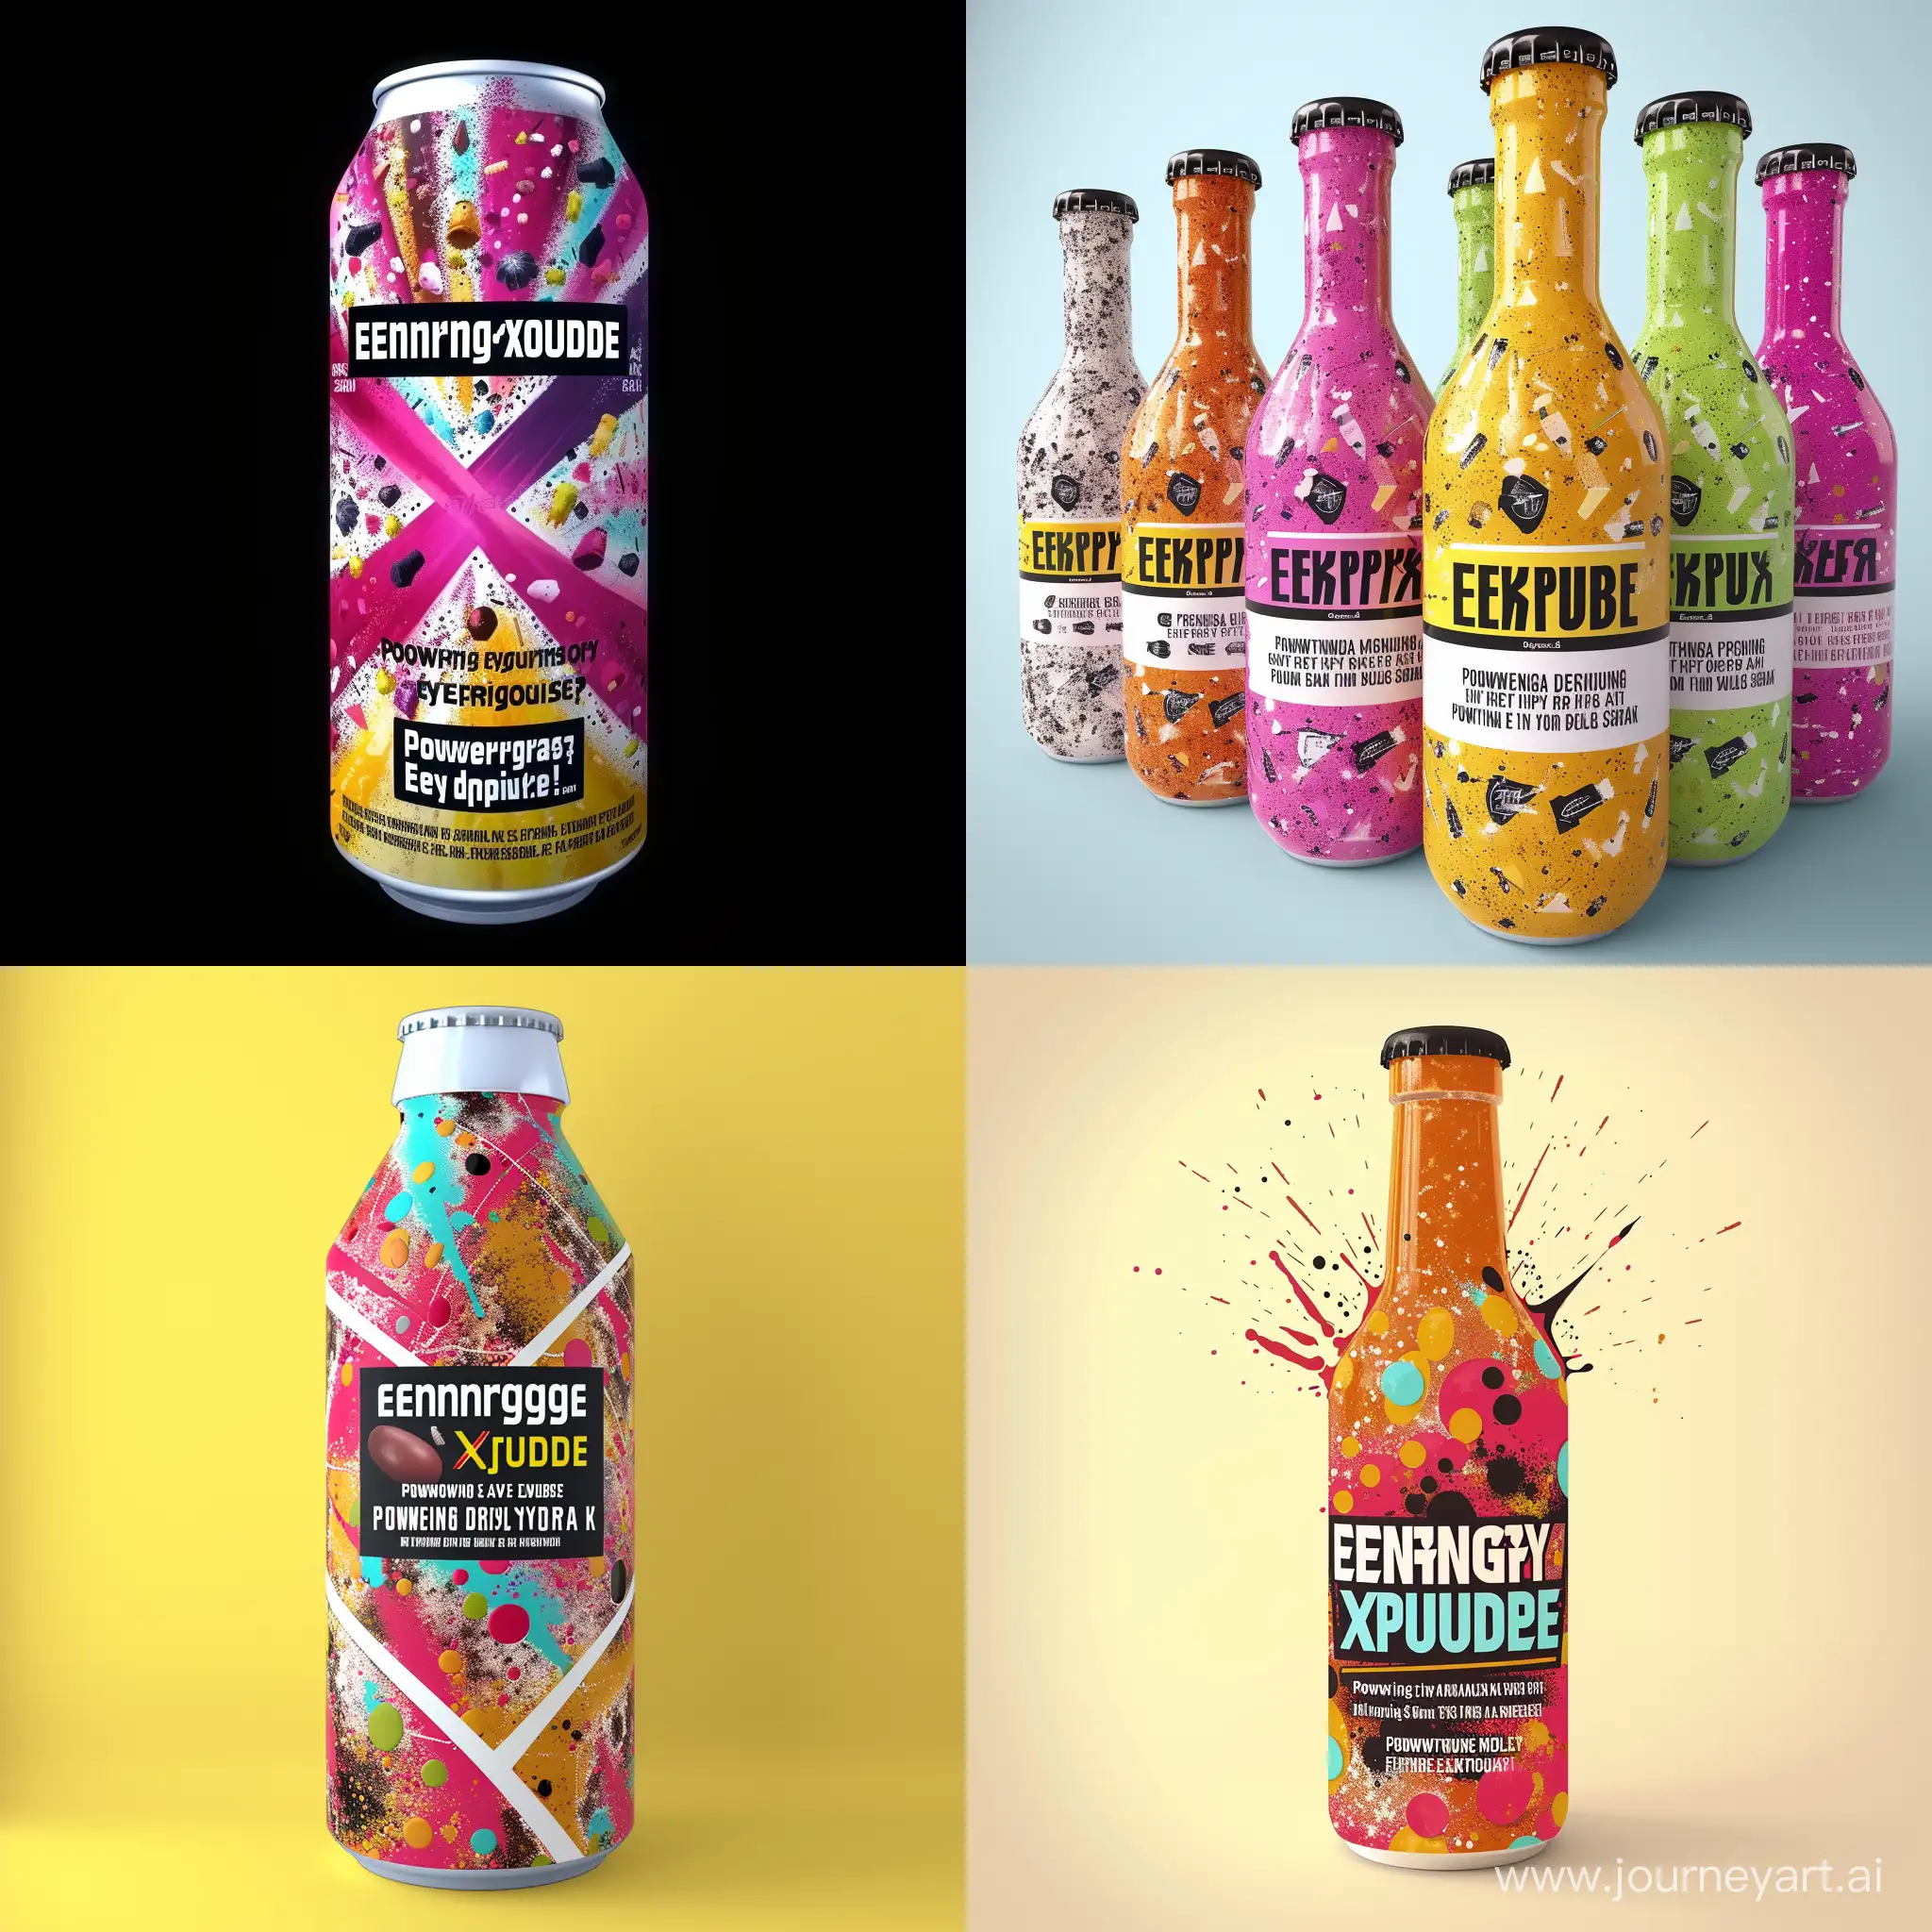 make a new type of energy drink with all the same ingredients that are in pre-workout formula. Make it eye catching, and make the buyer want it for their workout. Make it with a label with the name "EnergyXplode", and text under "Powering through every drop of sweat!" Make the design unique, and with vibrant colors
